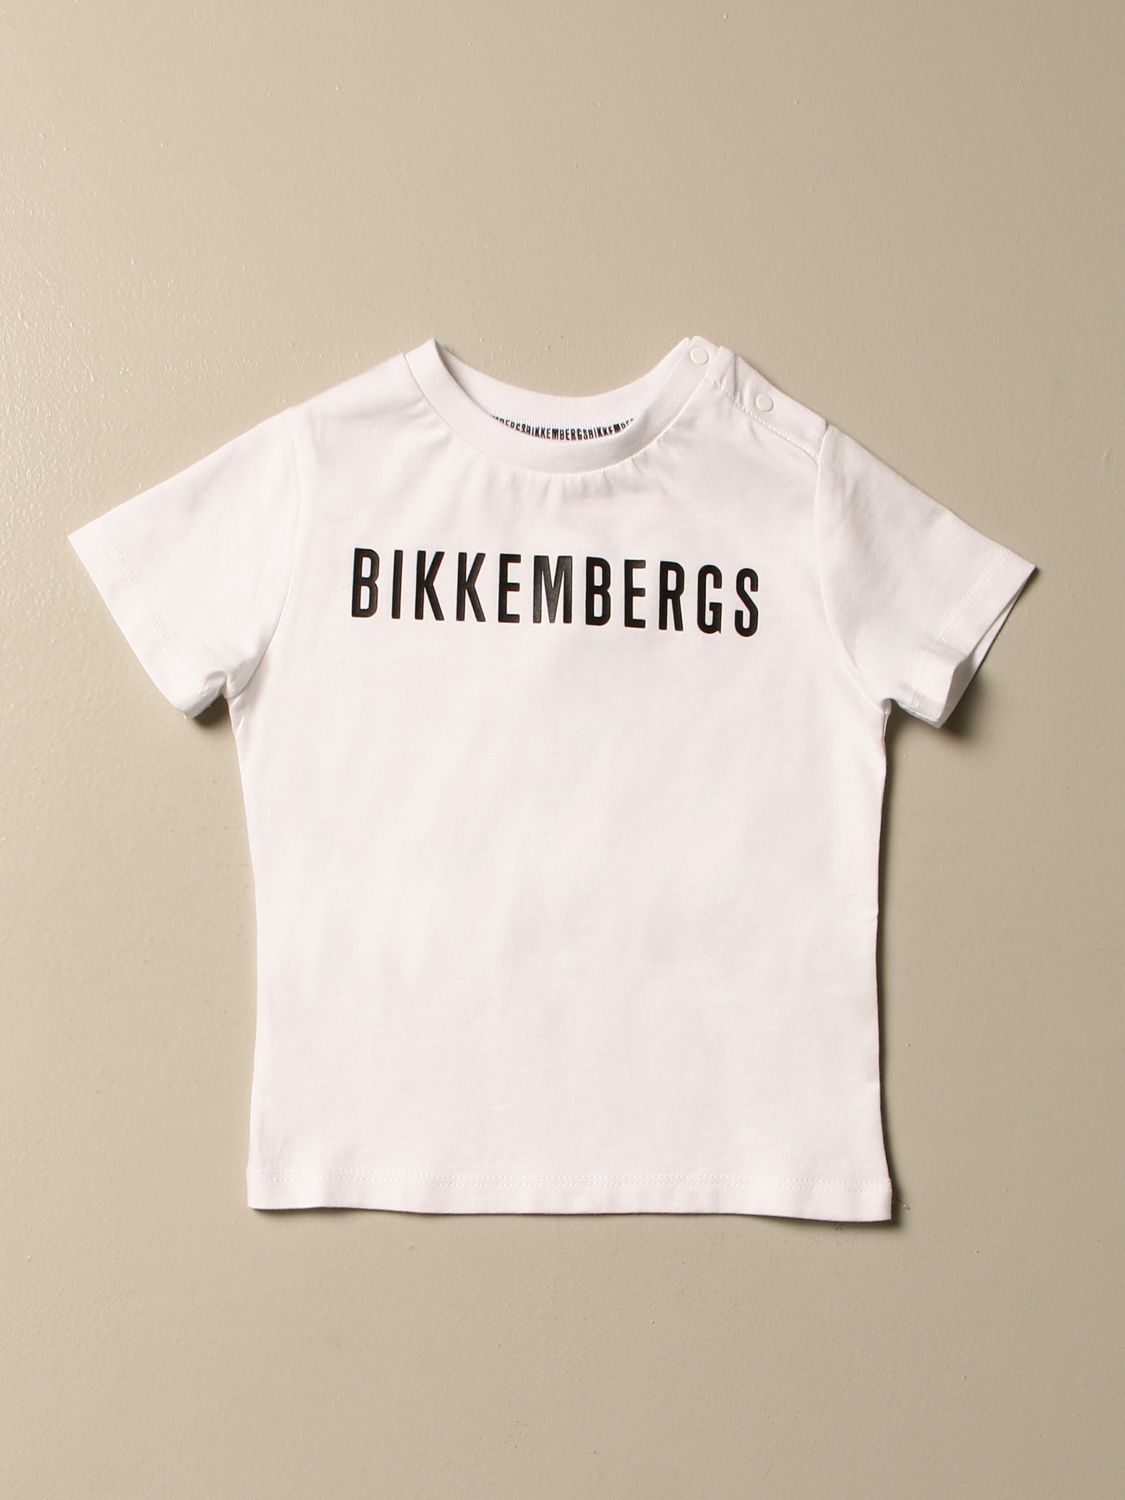 bikkembergs t shirt, clearance UP TO 82% OFF - www 